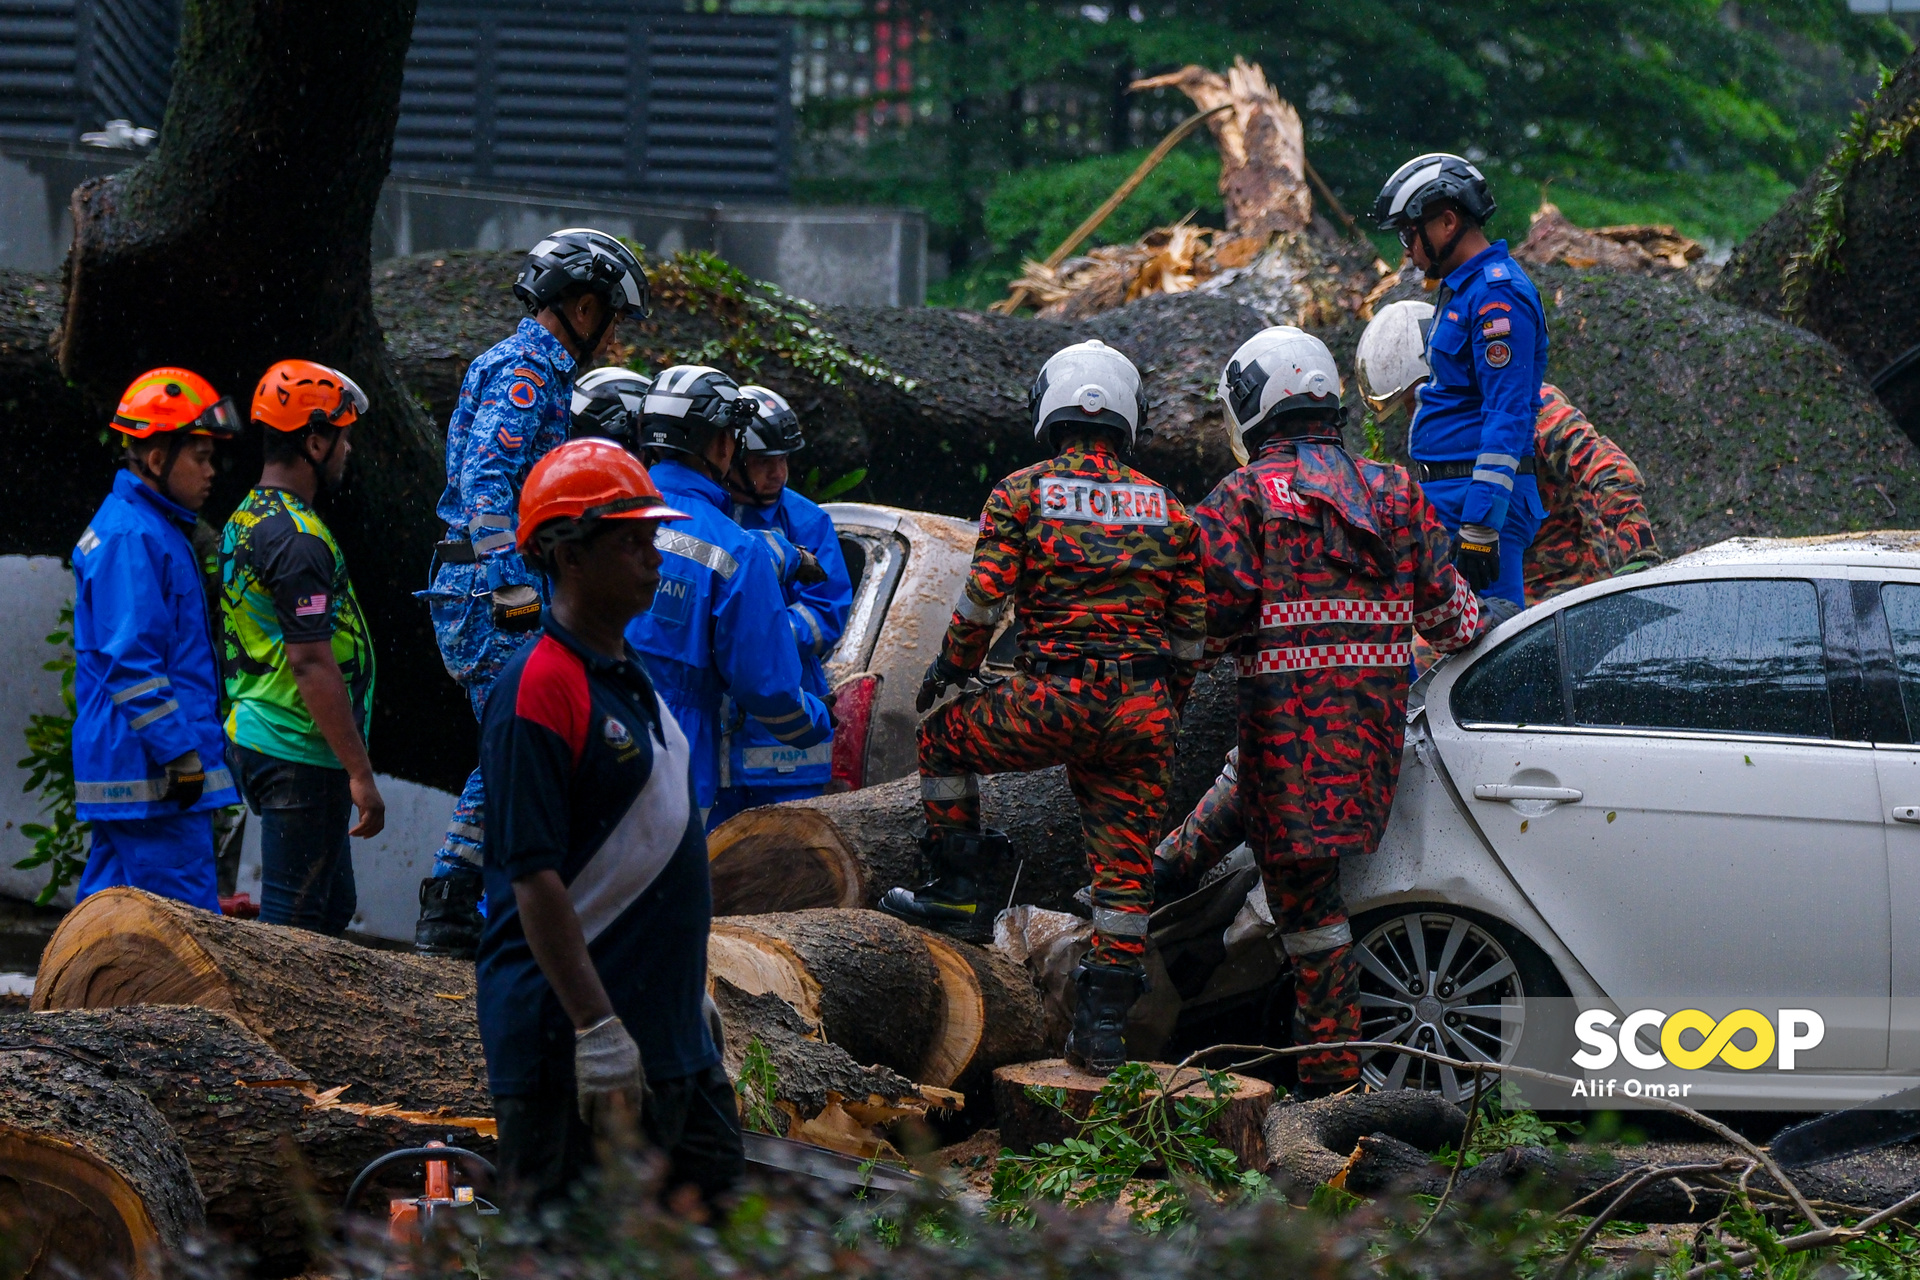 KL Concorde Hotel staff quick to assist after fallen tree traps people, cars